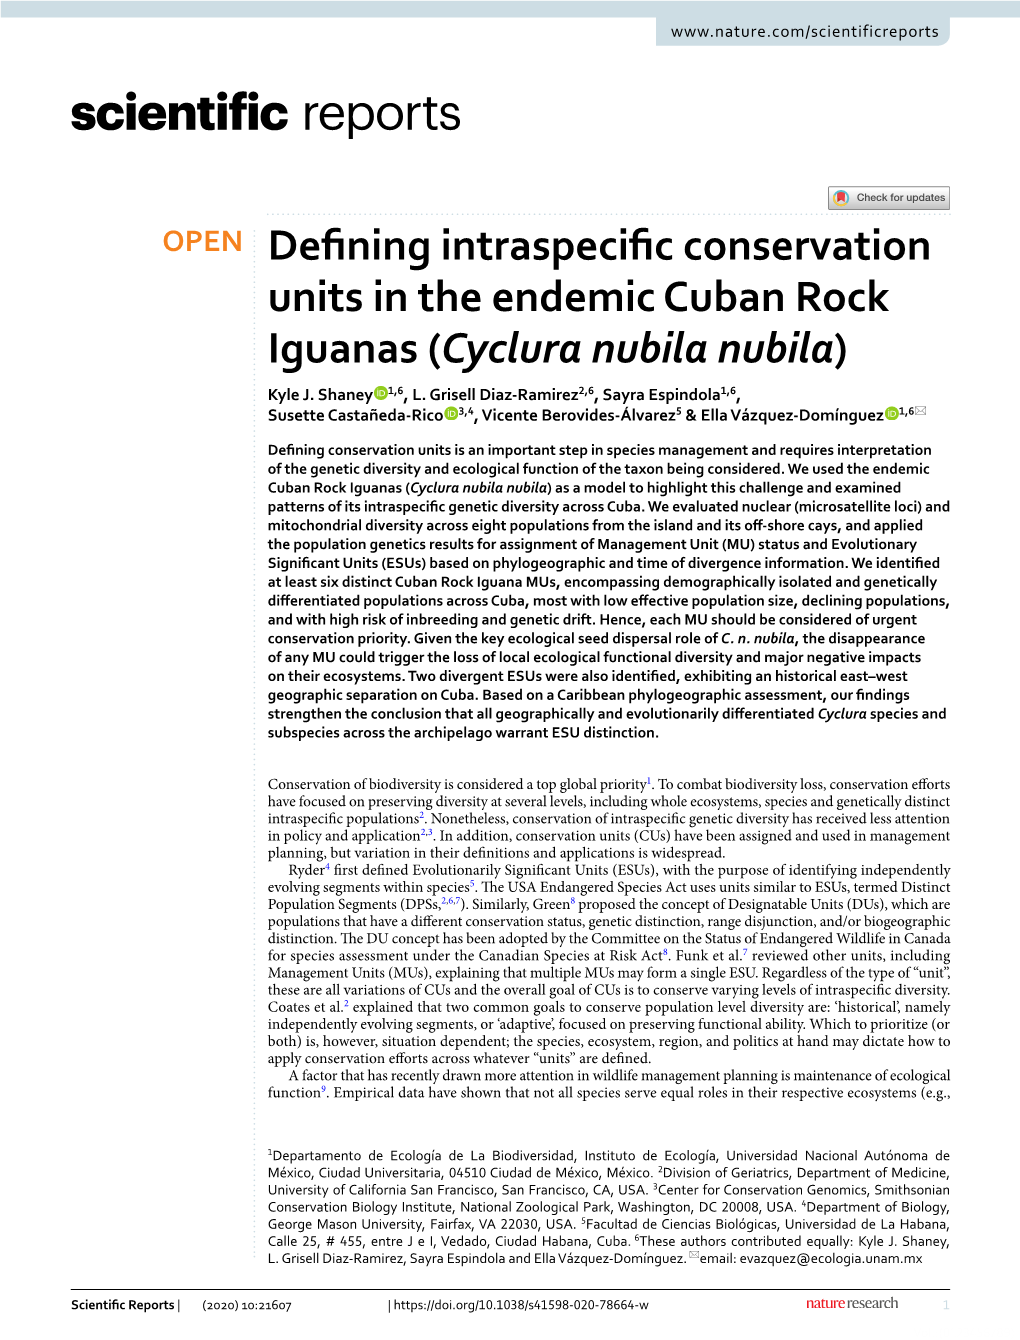 Defining Intraspecific Conservation Units in the Endemic Cuban Rock